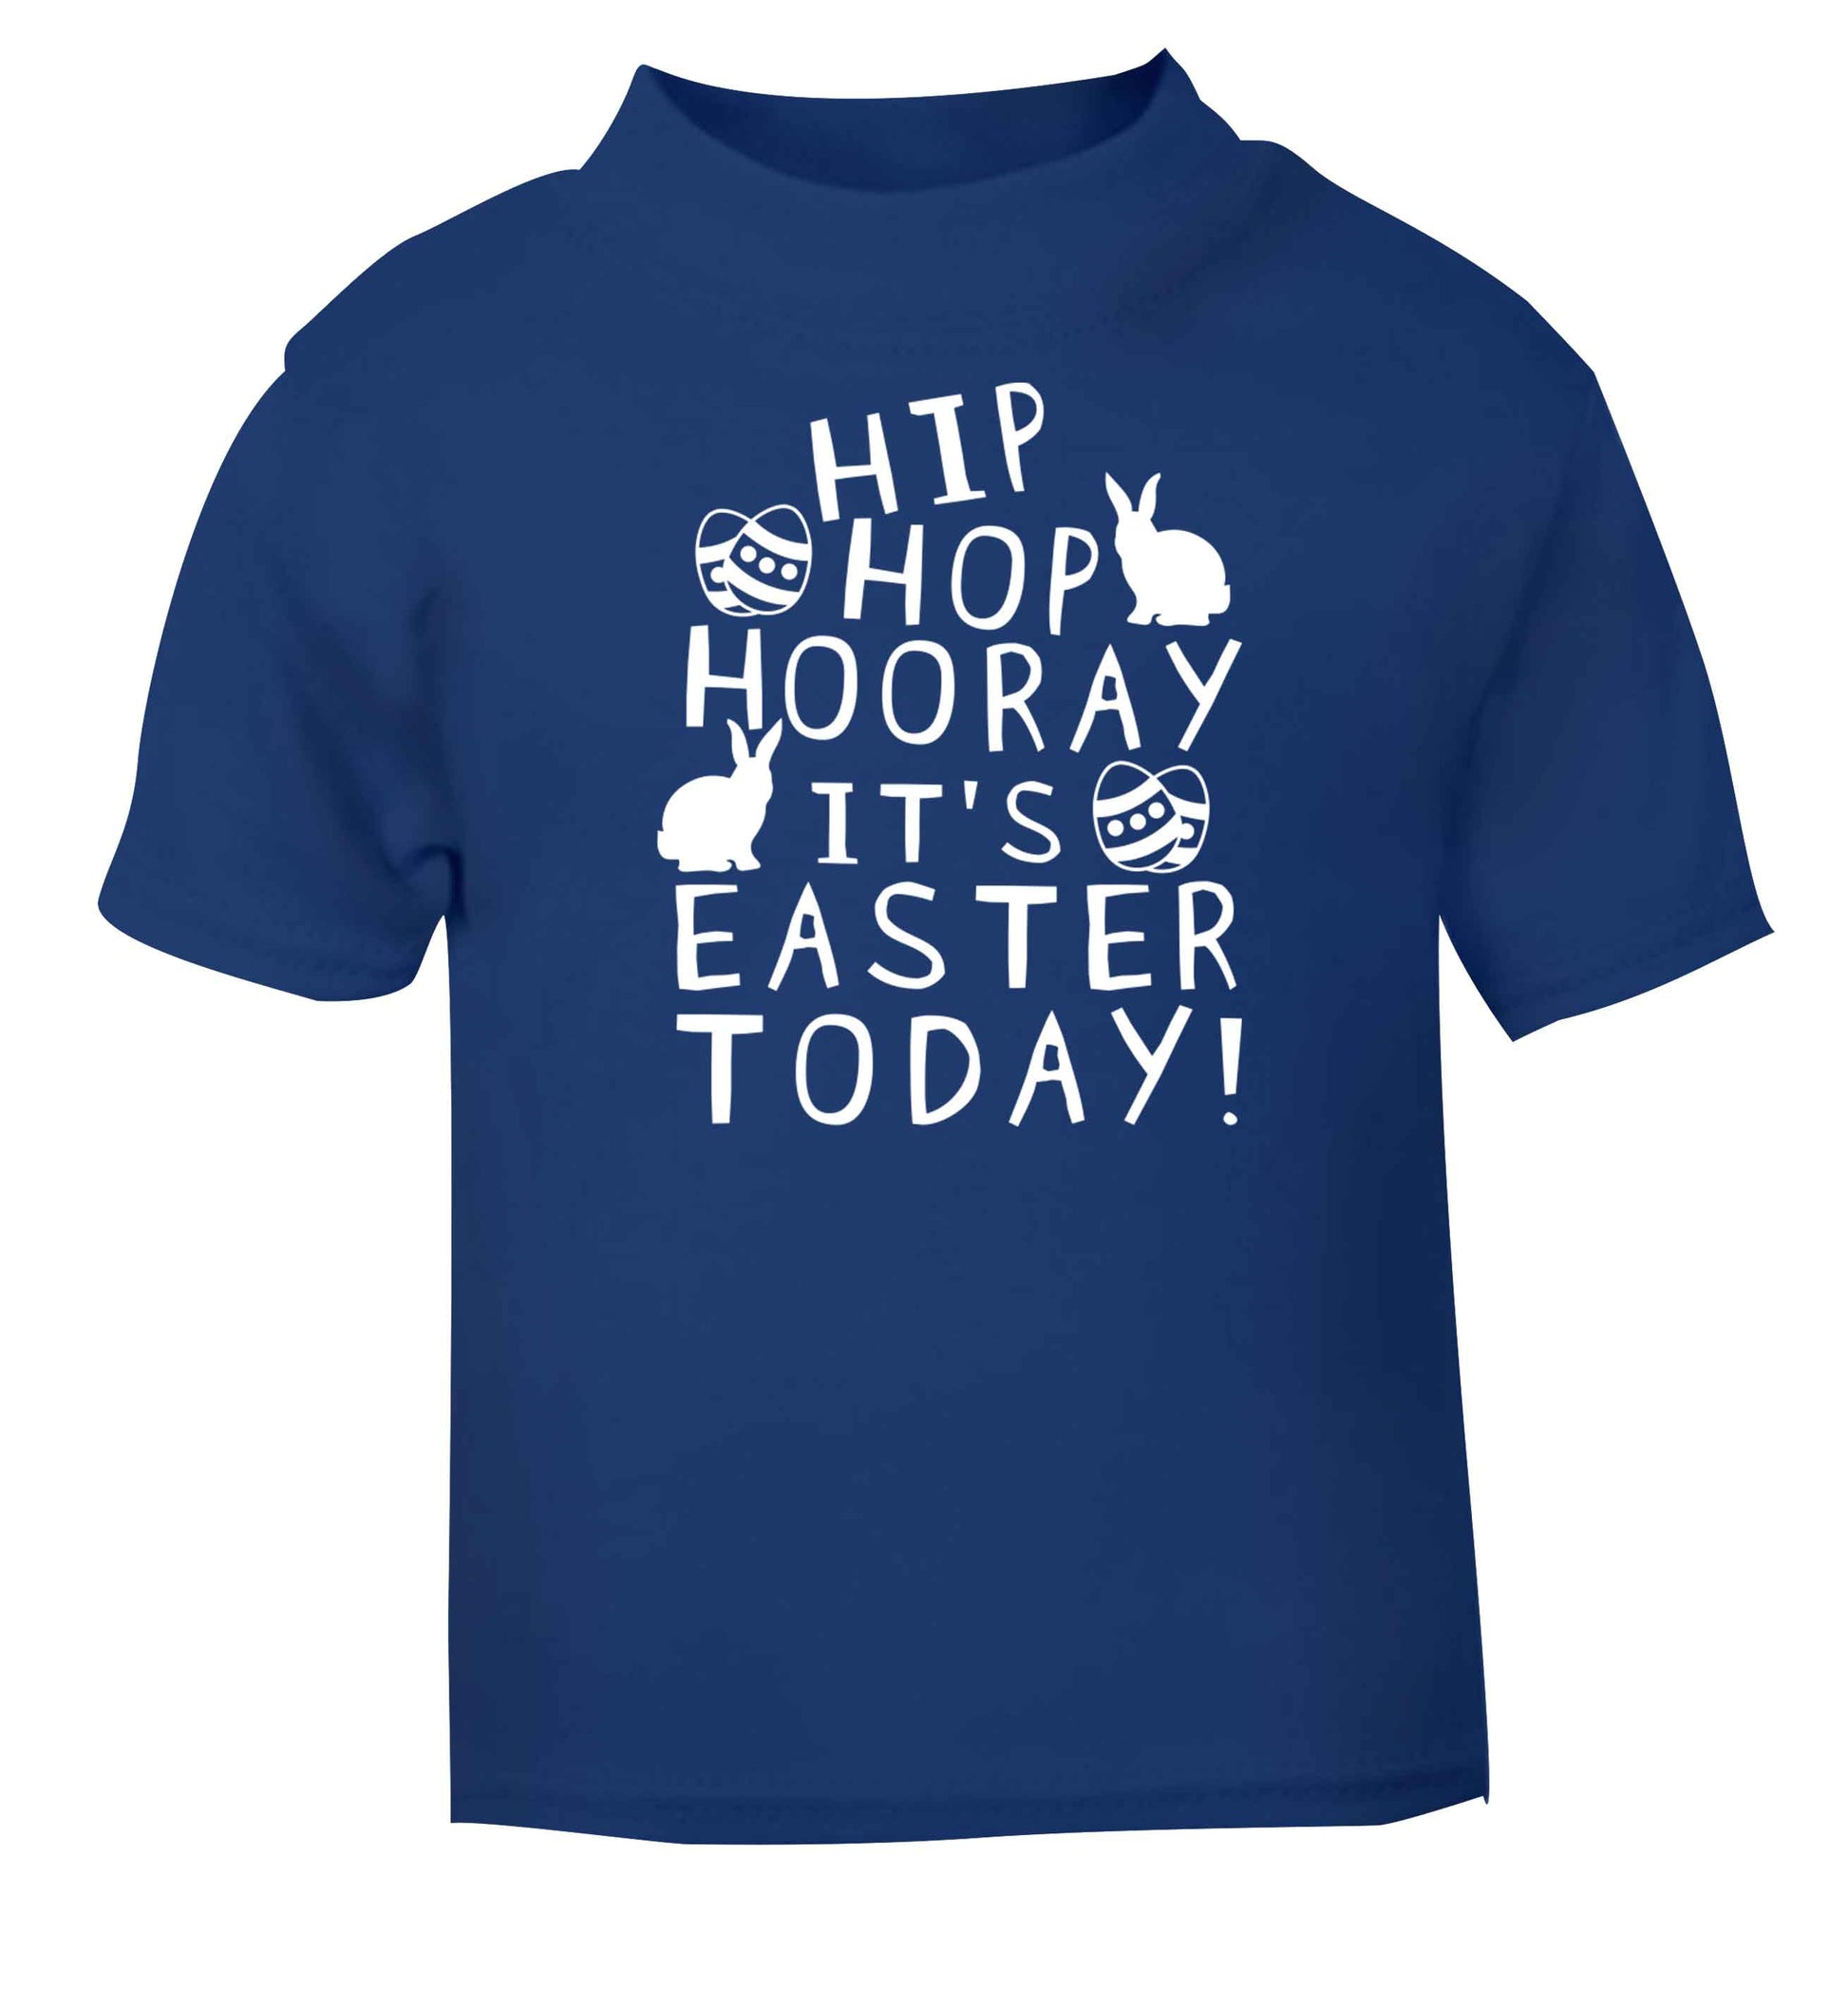 Hip hip hooray it's Easter today! blue baby toddler Tshirt 2 Years